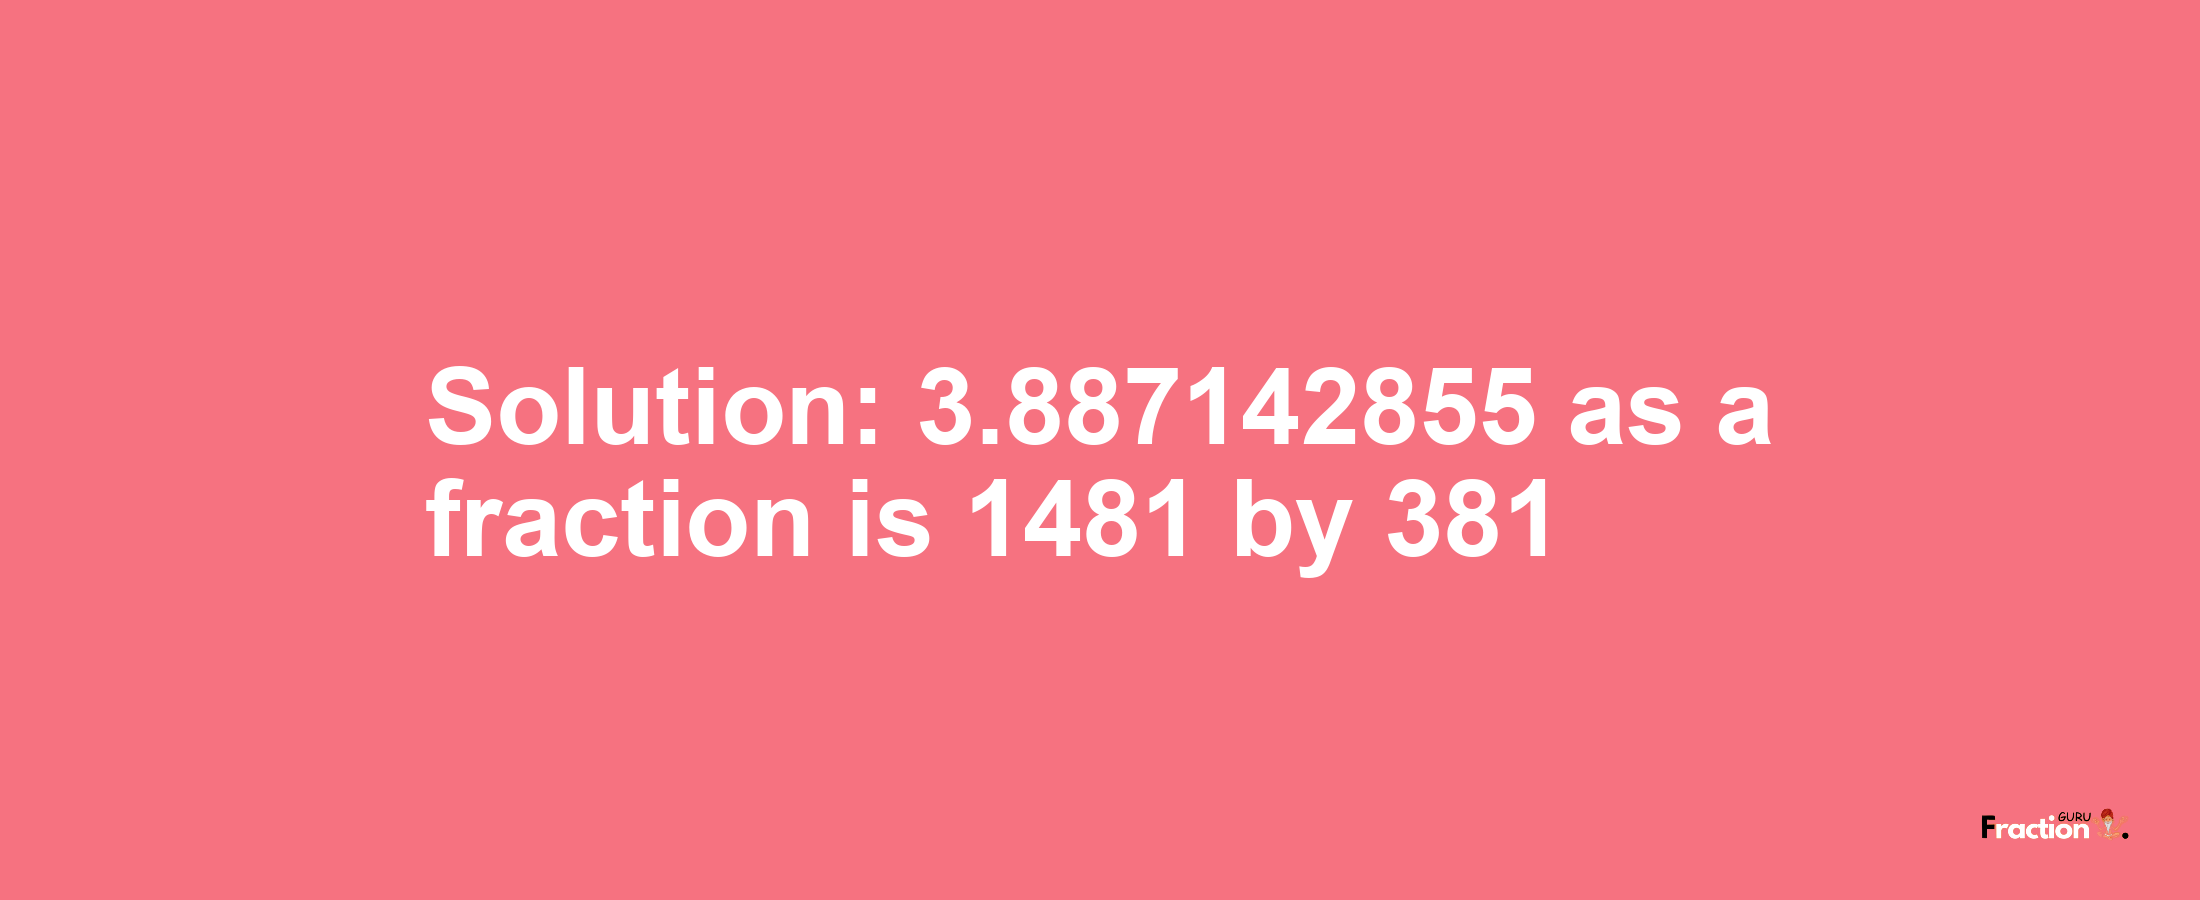 Solution:3.887142855 as a fraction is 1481/381